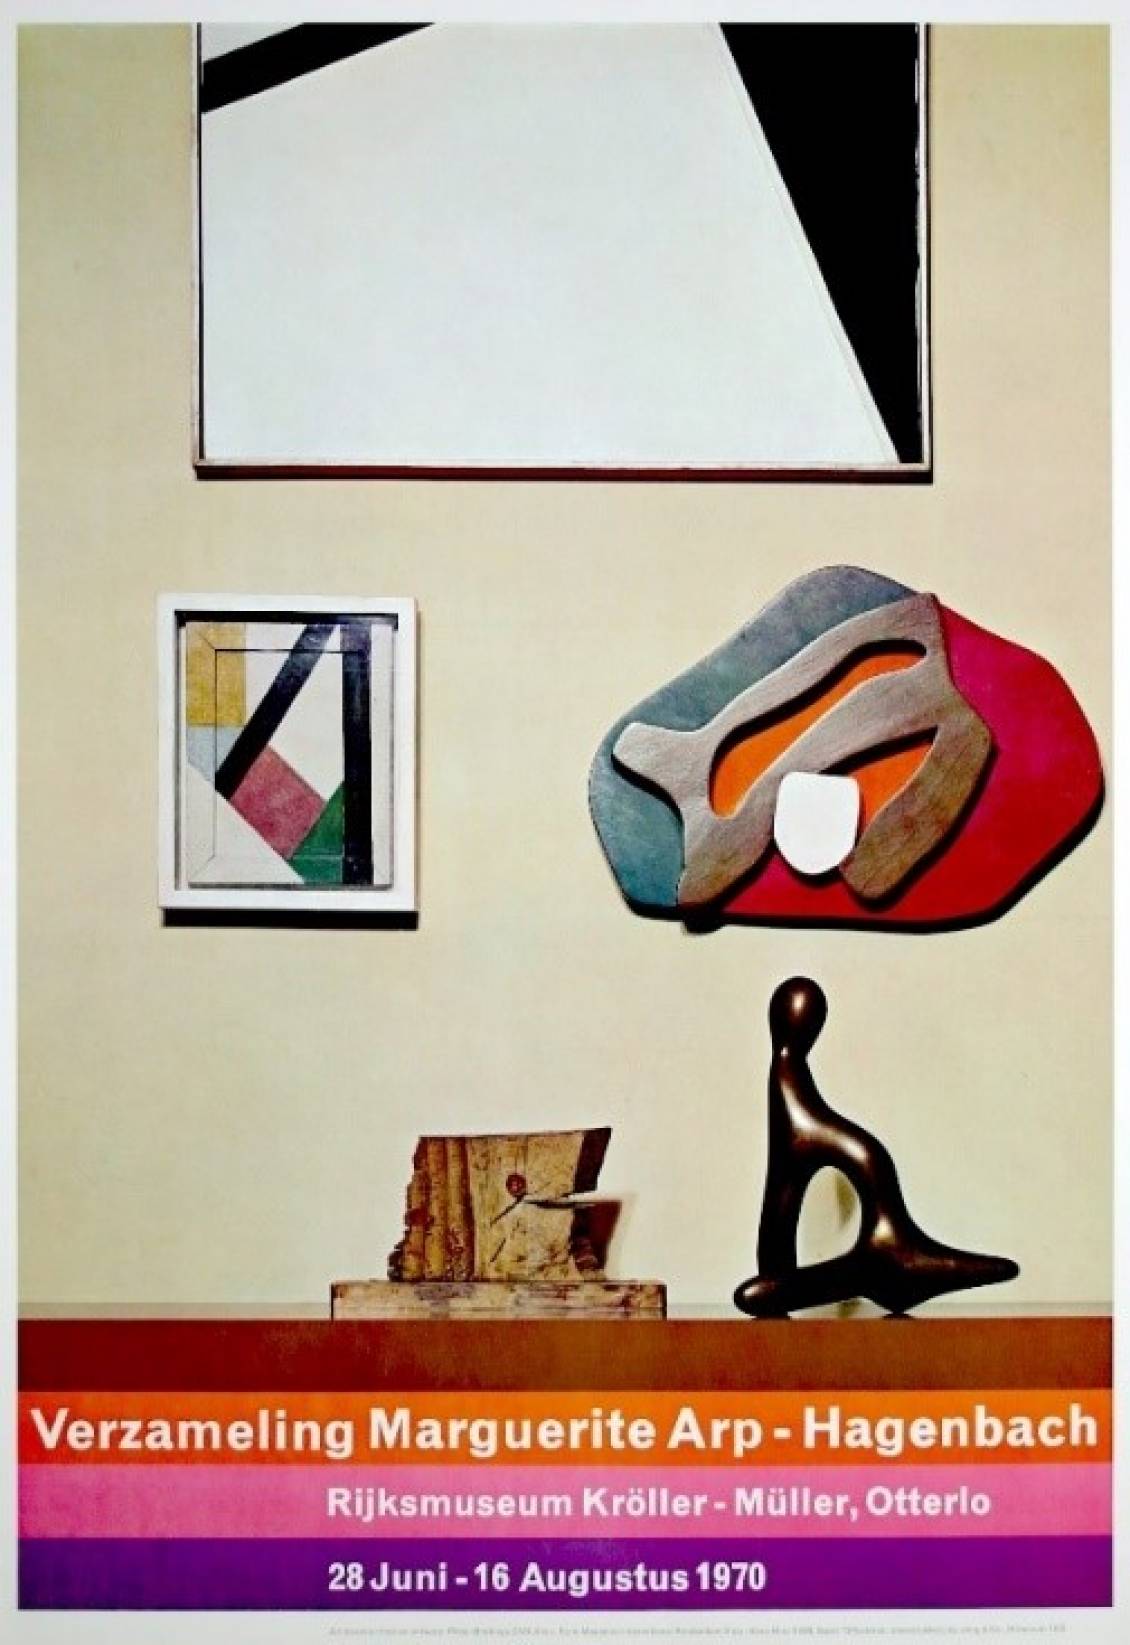 Poster Collection of Marguerite Arp-Hagenbach, 1970